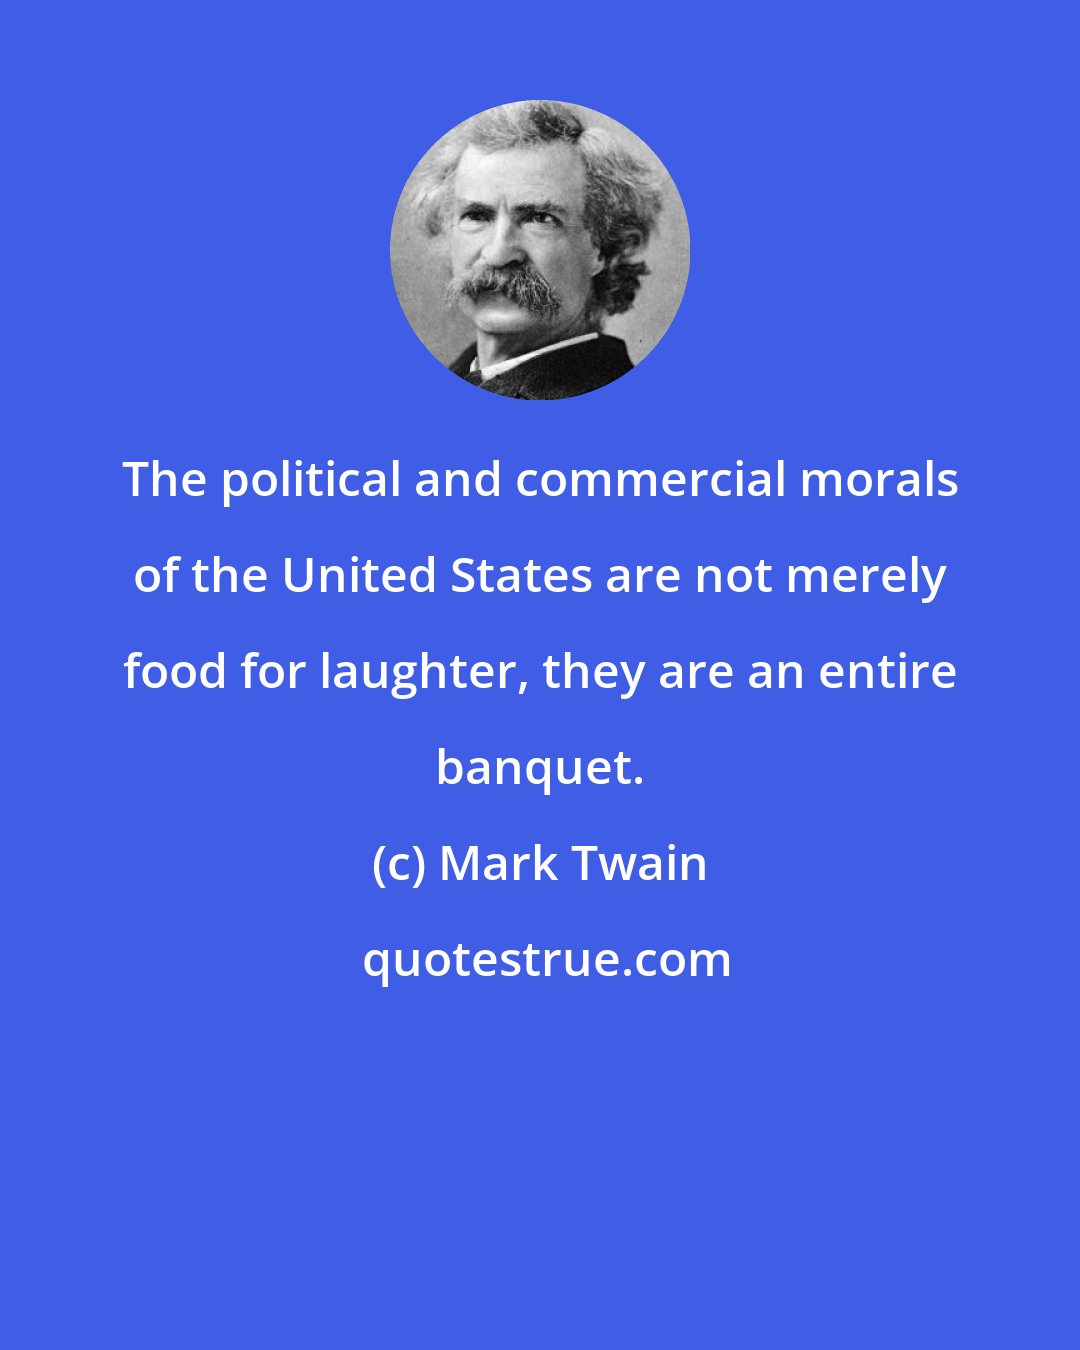 Mark Twain: The political and commercial morals of the United States are not merely food for laughter, they are an entire banquet.